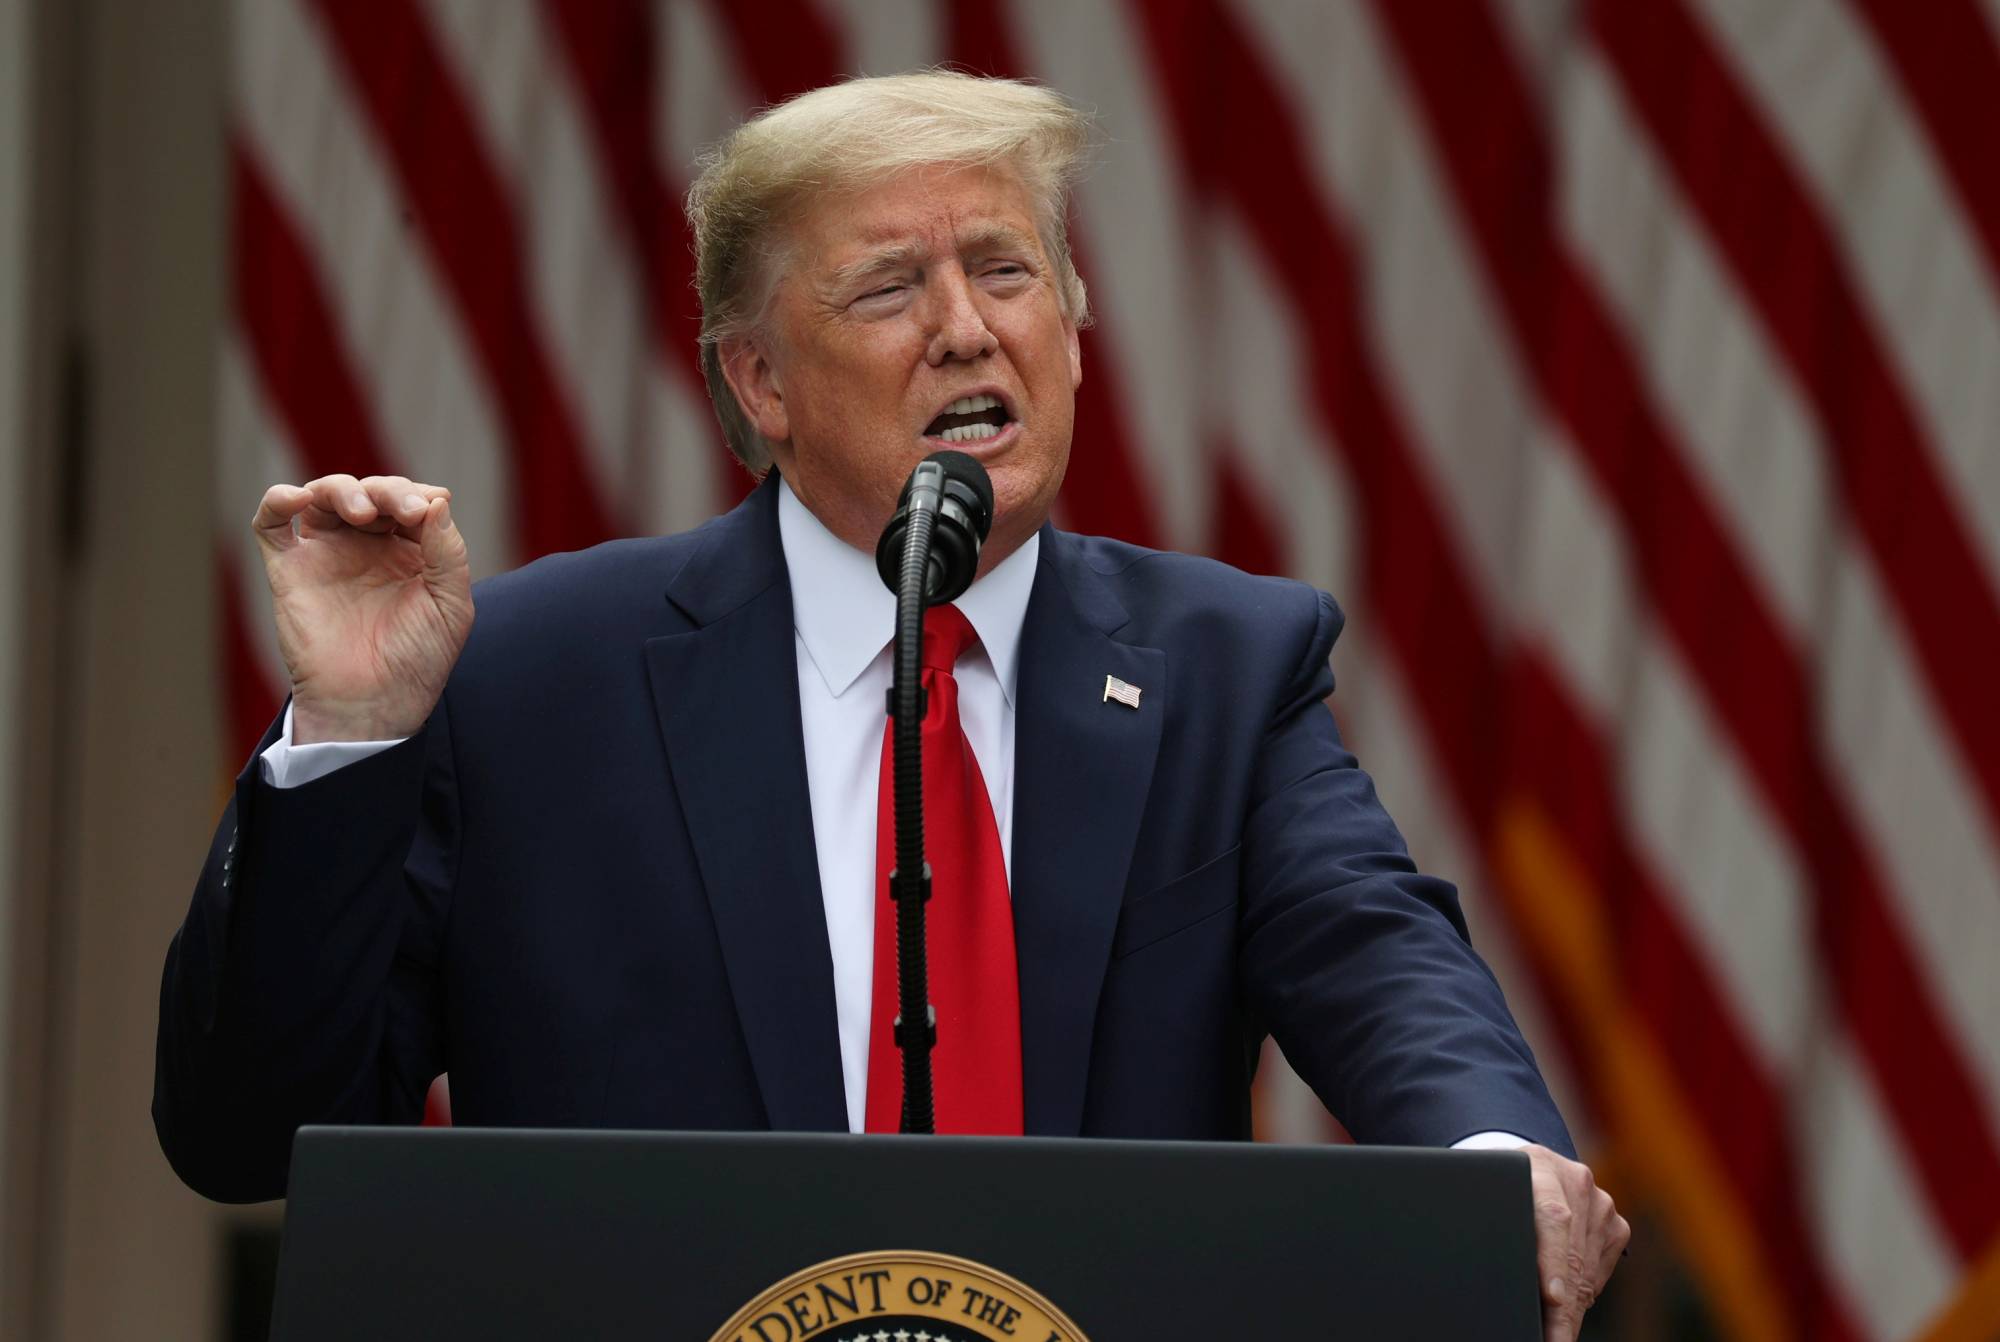 Stating that China uses grad students and researchers to illegally acquire intellectual property from the United States, President Donald Trump on May 29 announced the issuance of an executive order suspending their entry into the country.  | REUTERS